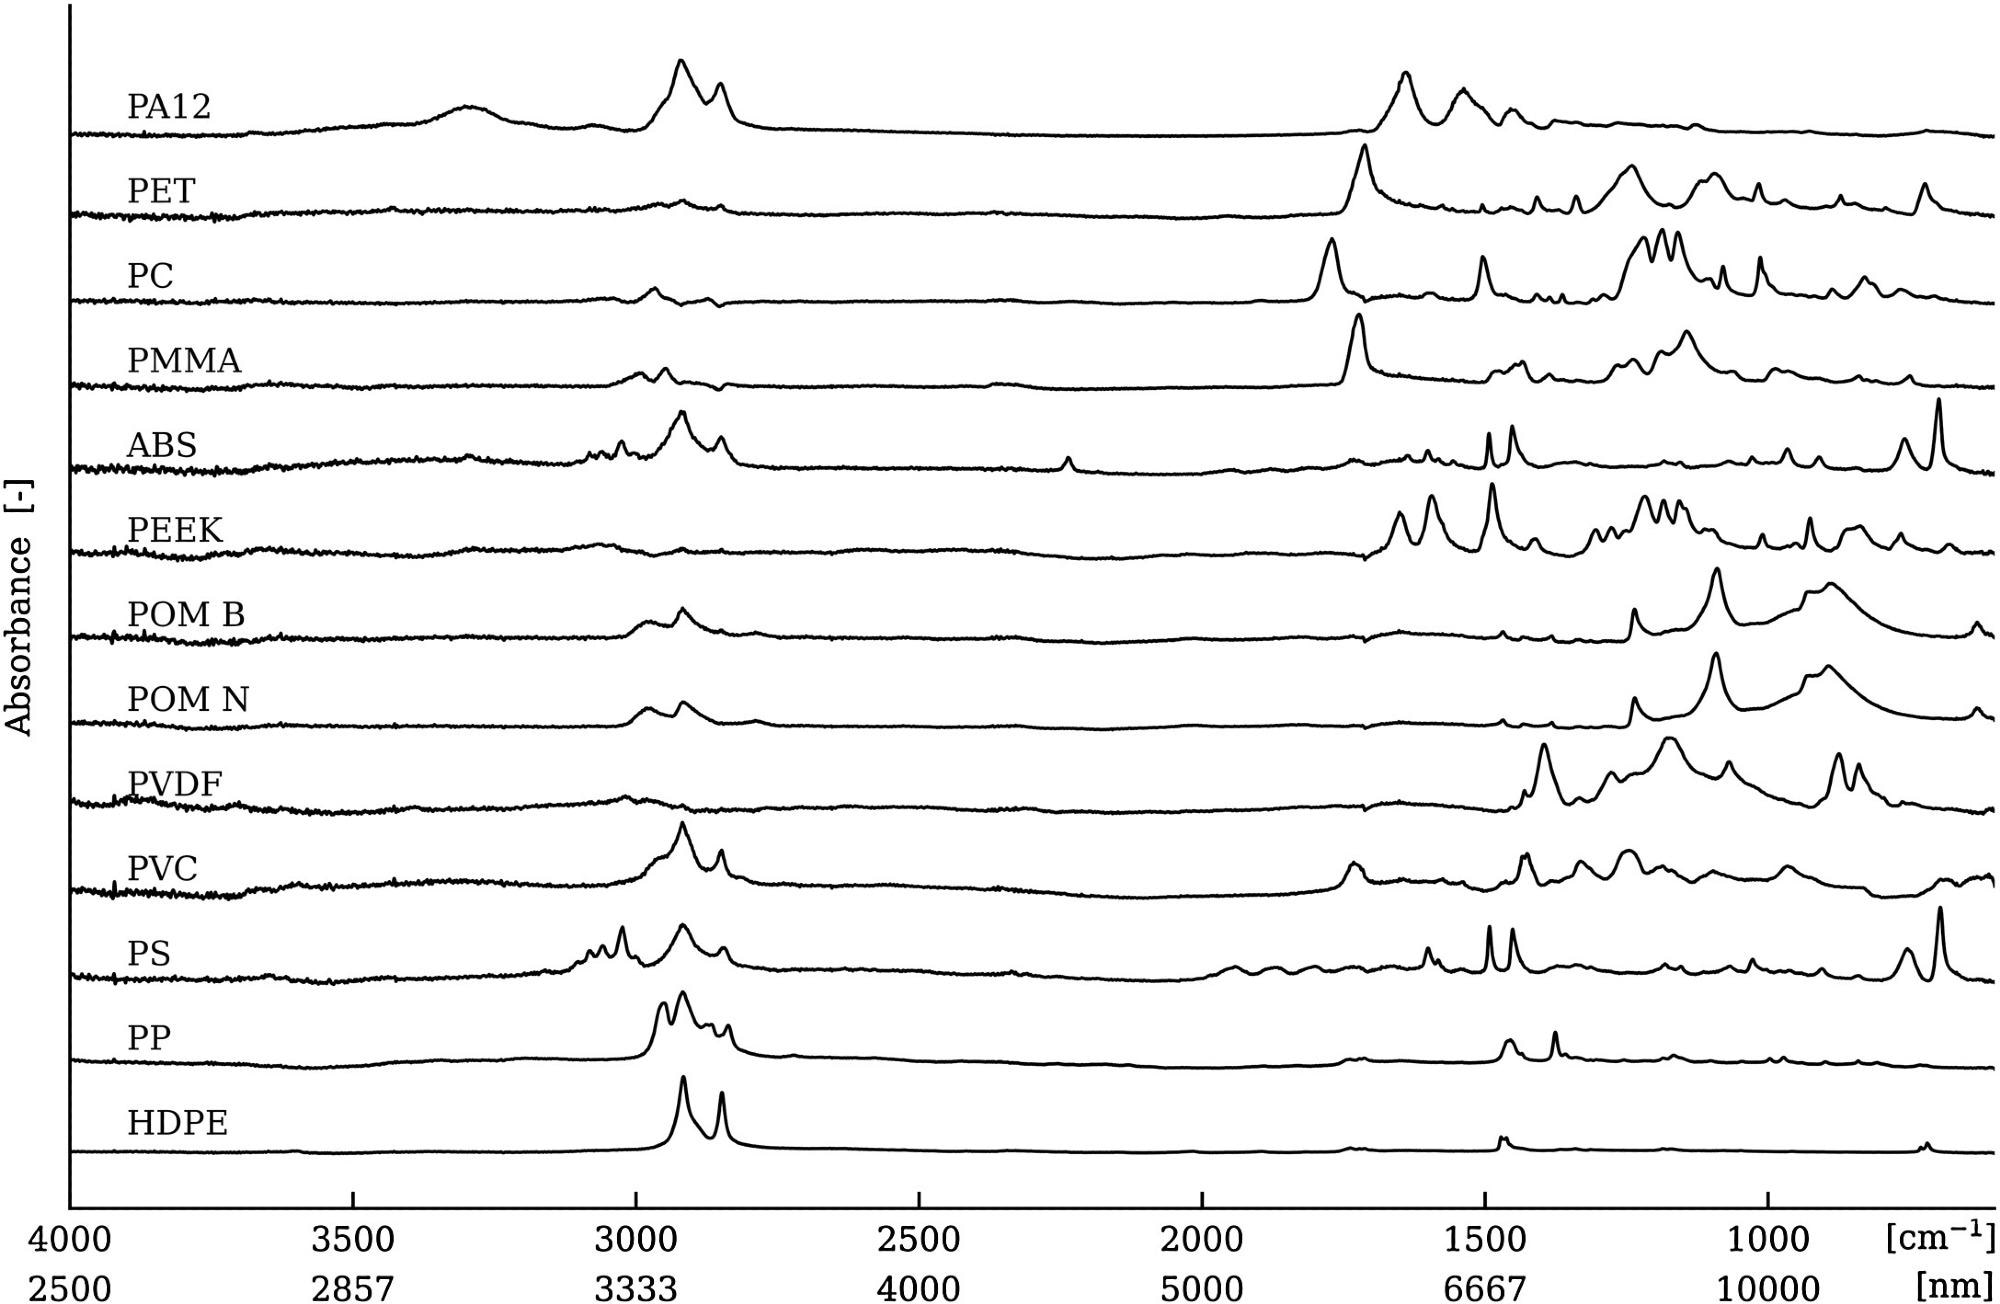 FT-IR spectra for the materials tested. The spectra are shifted for visual clarity.